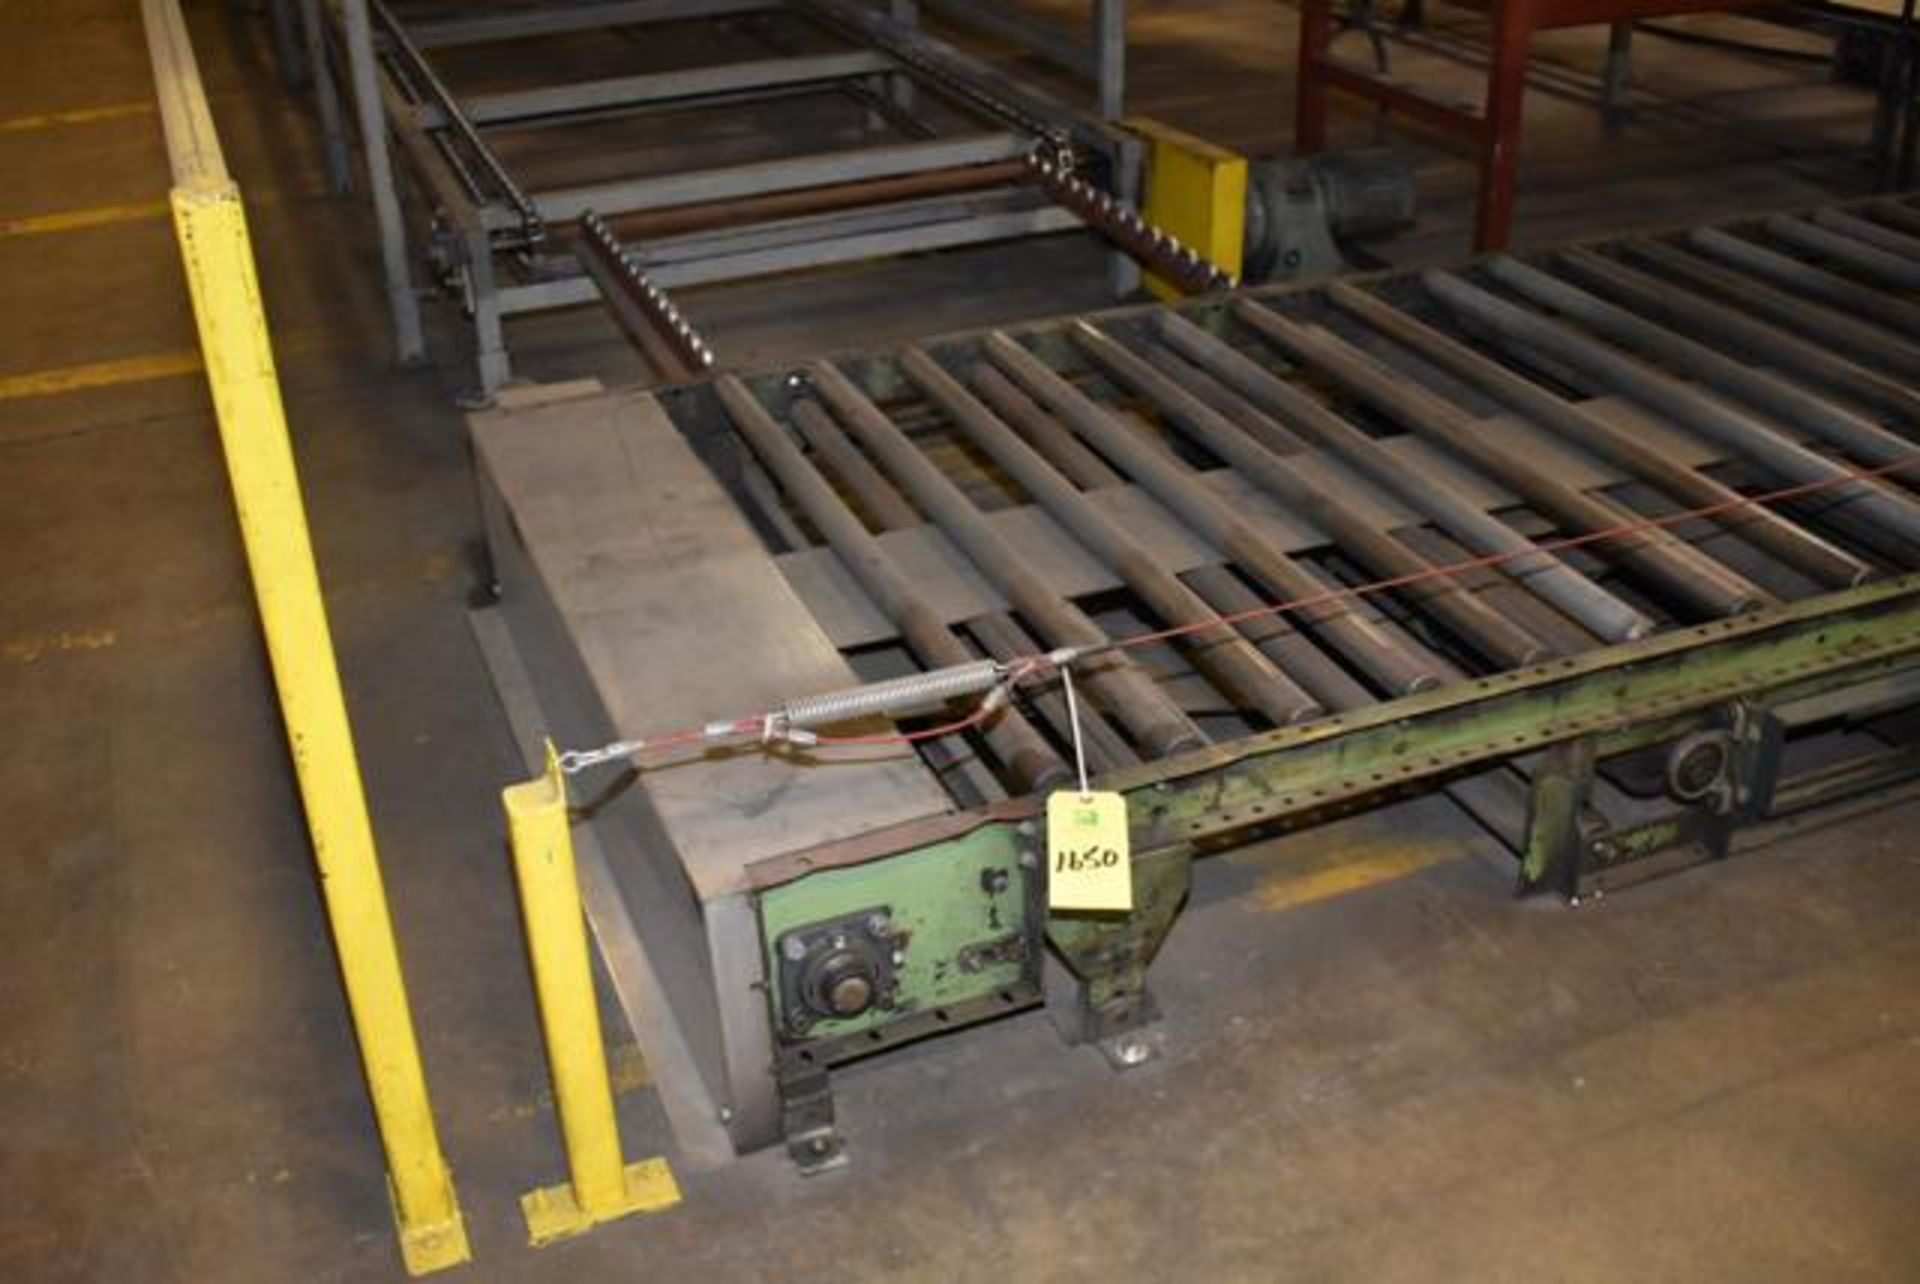 Motorized Roller Conveyor, 50" Rollers x Approx. 126' Length, RIGGING FEE: CONTACT RIGGER